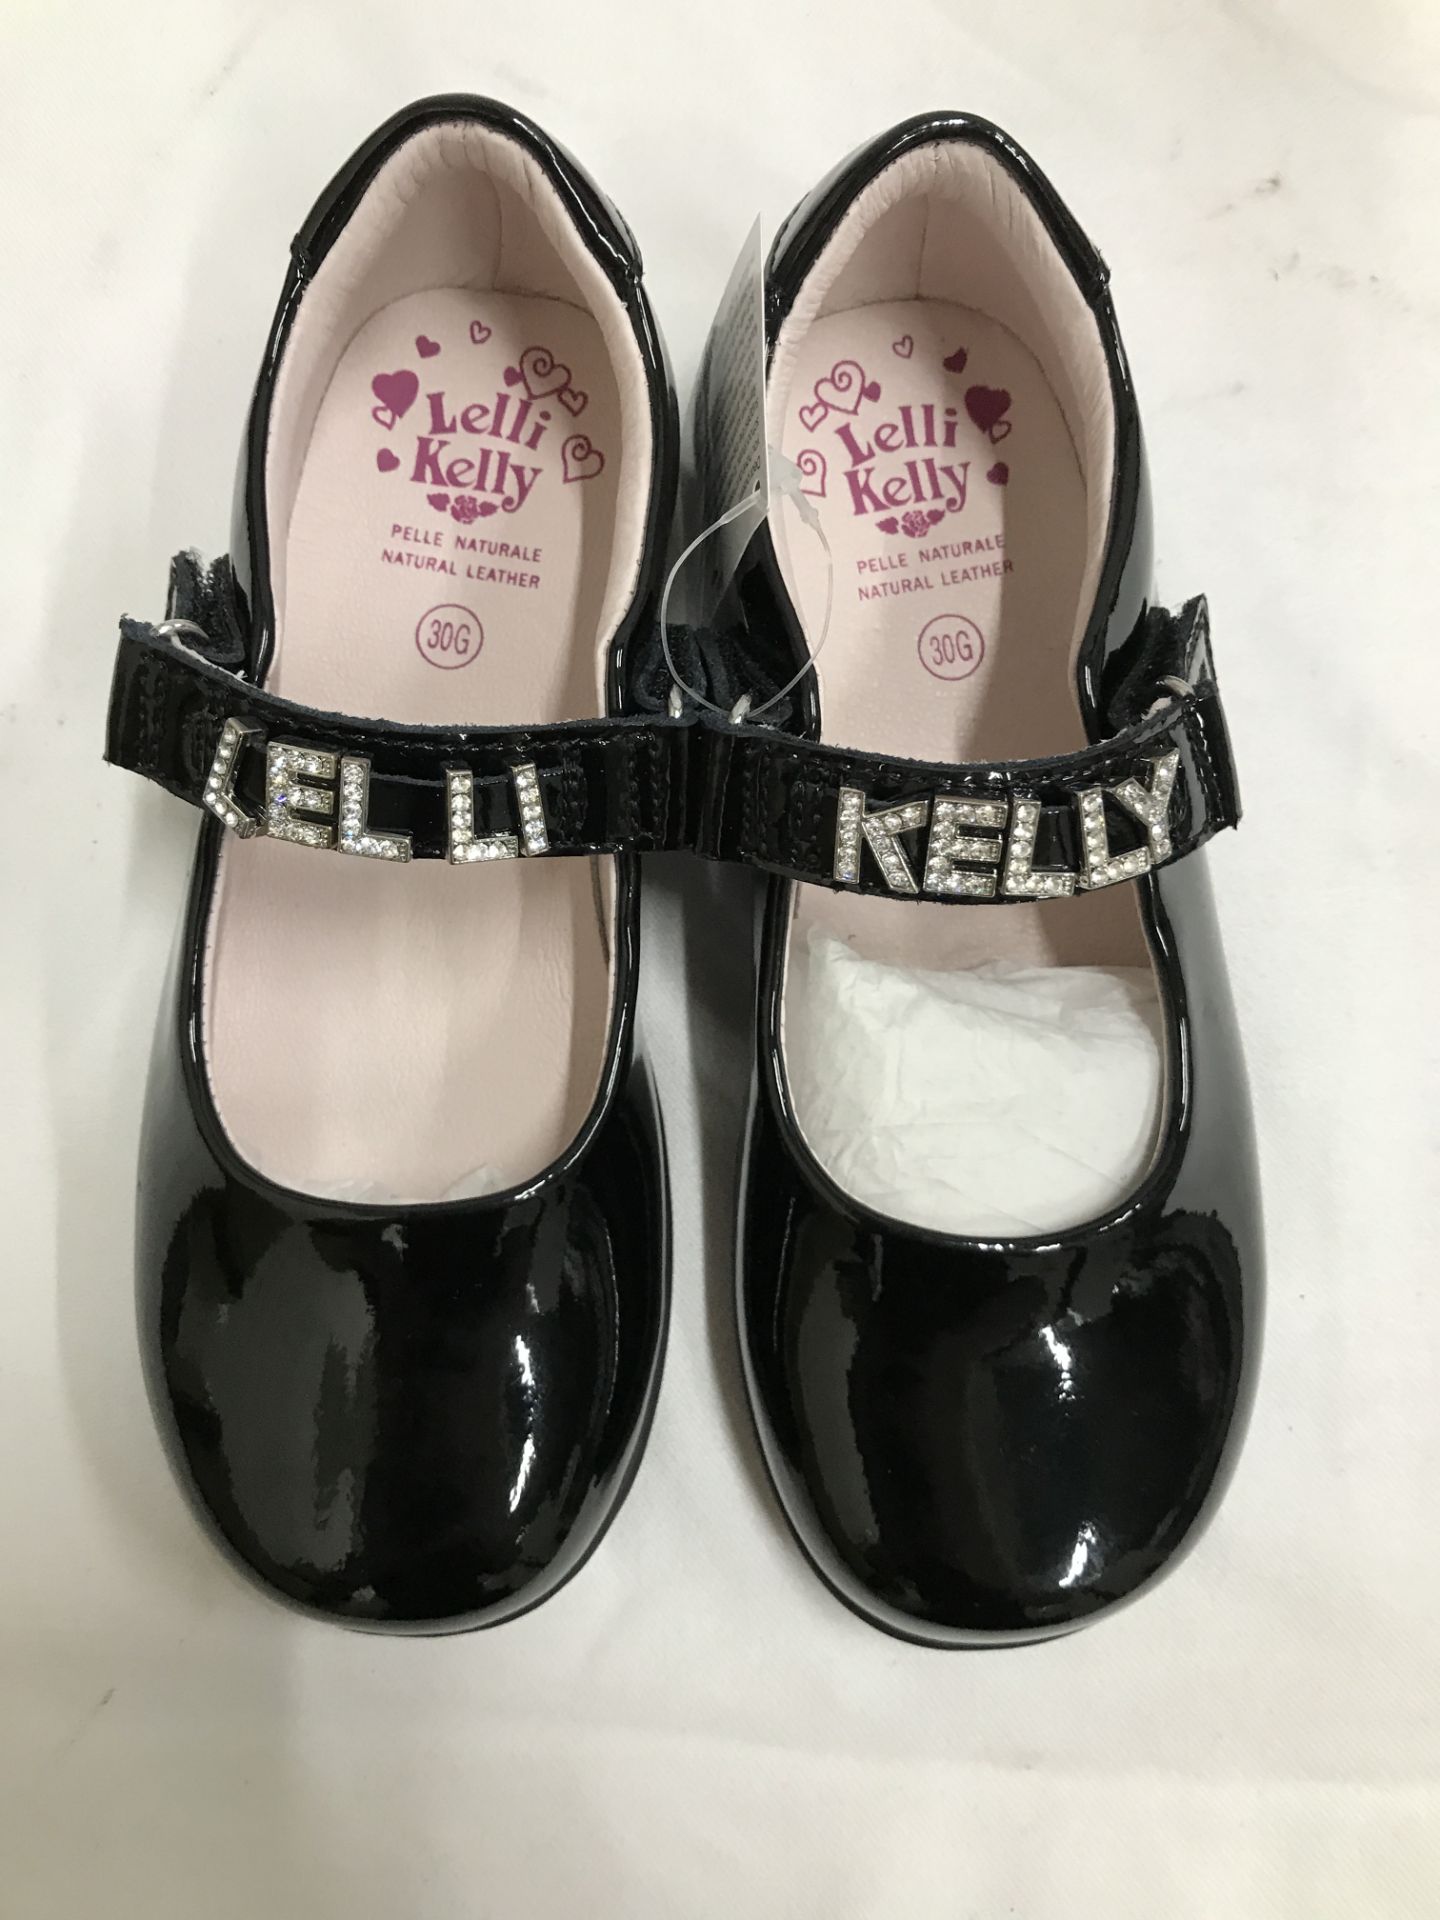 17 x Pairs of Lelli Kelly Children's Shoes - Various Designs & Sizes - Image 10 of 15